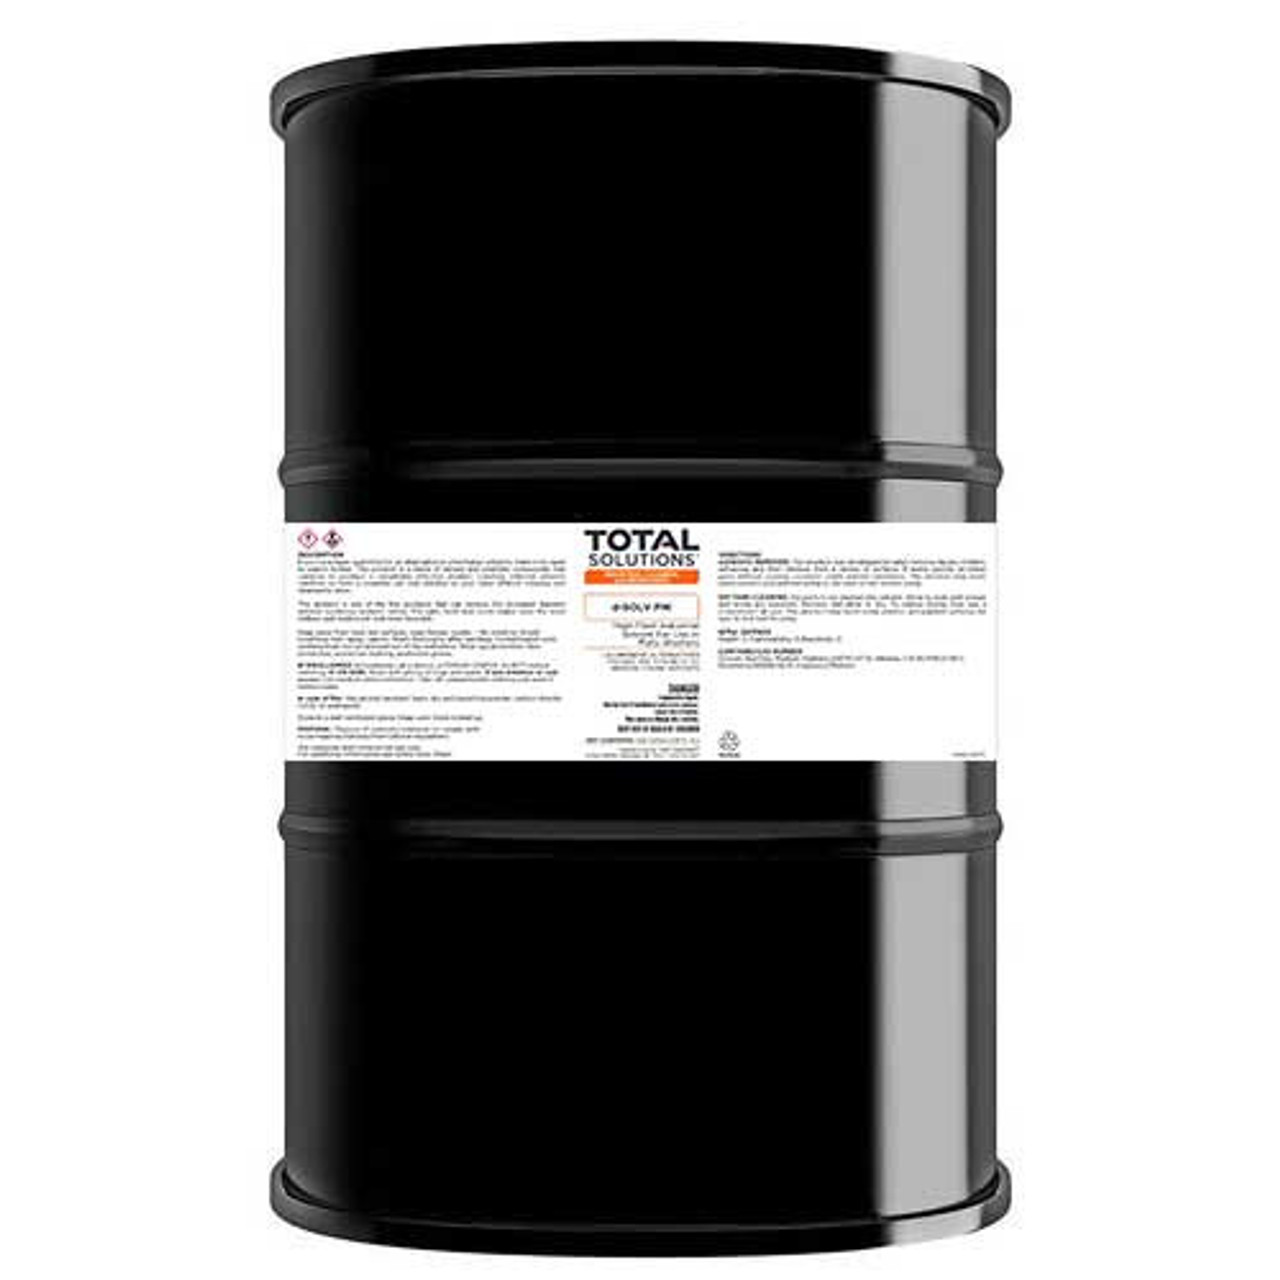 d-Solv PW - Powerful High-Flash Parts Cleaner 55 Gallon Drum